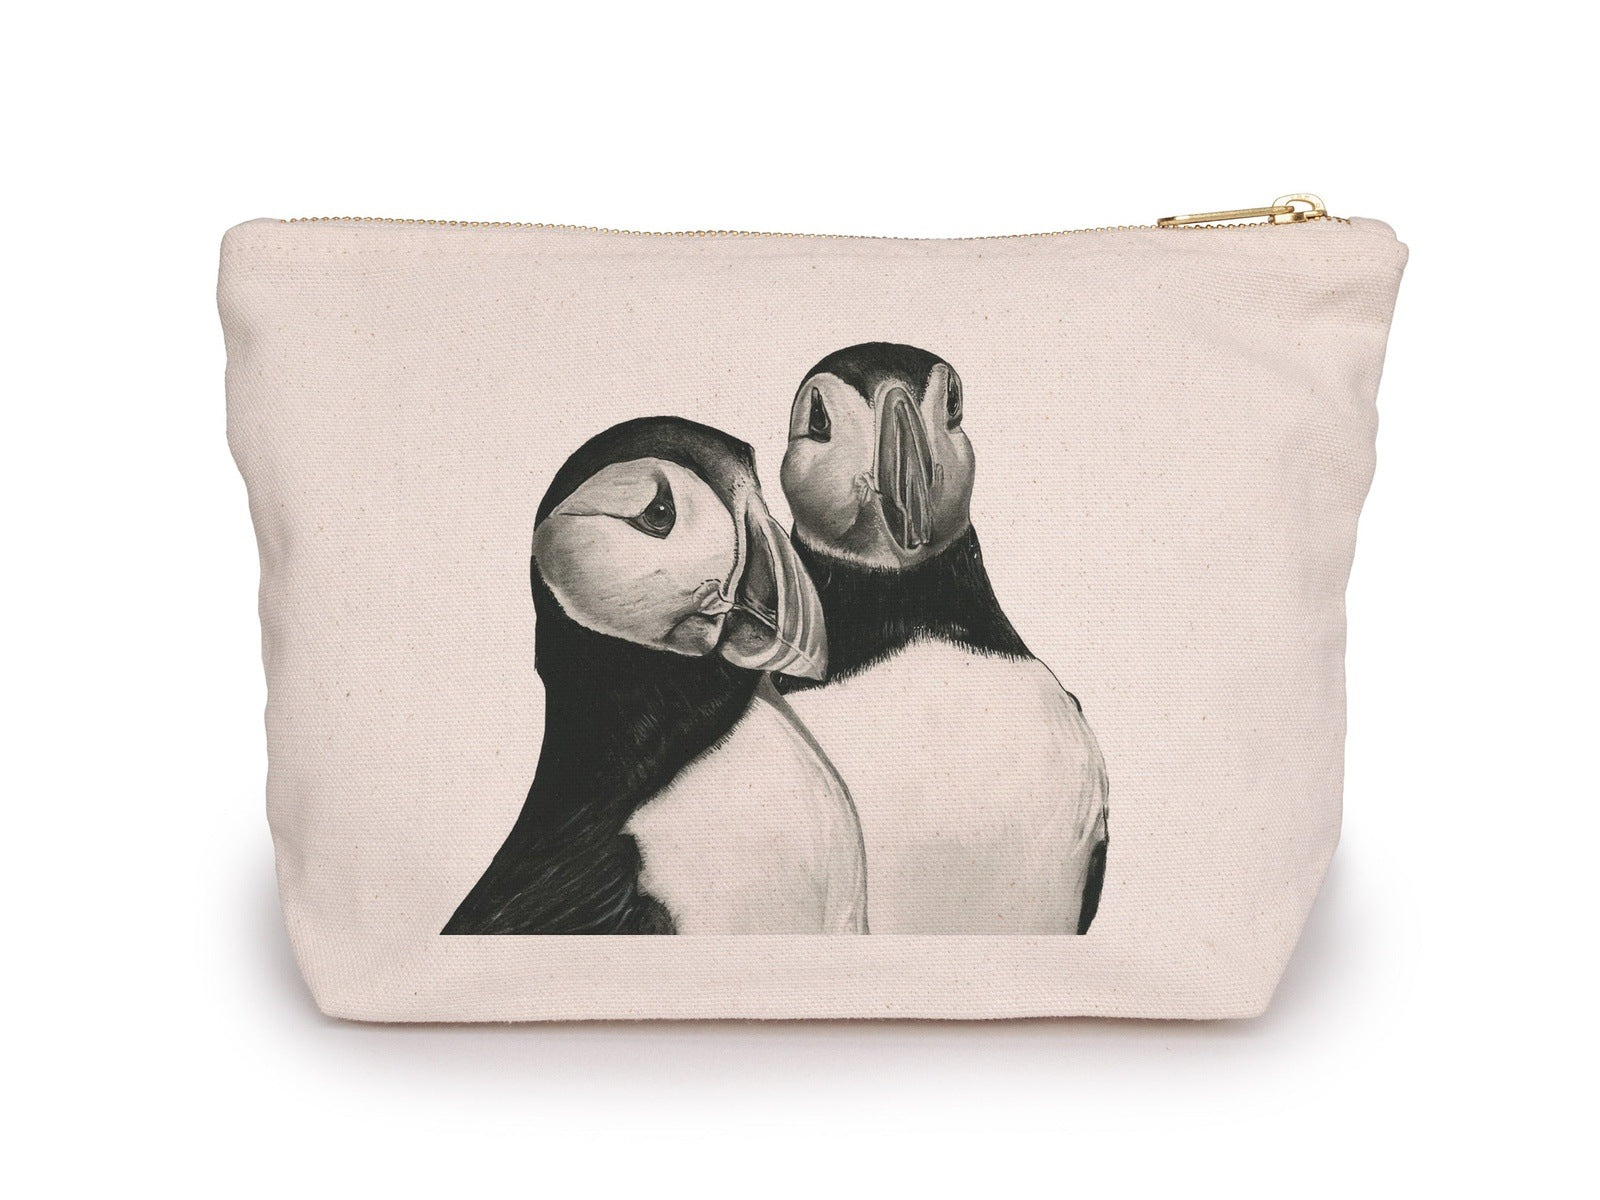 Puffin Pouch Bag From Libra Fine Arts